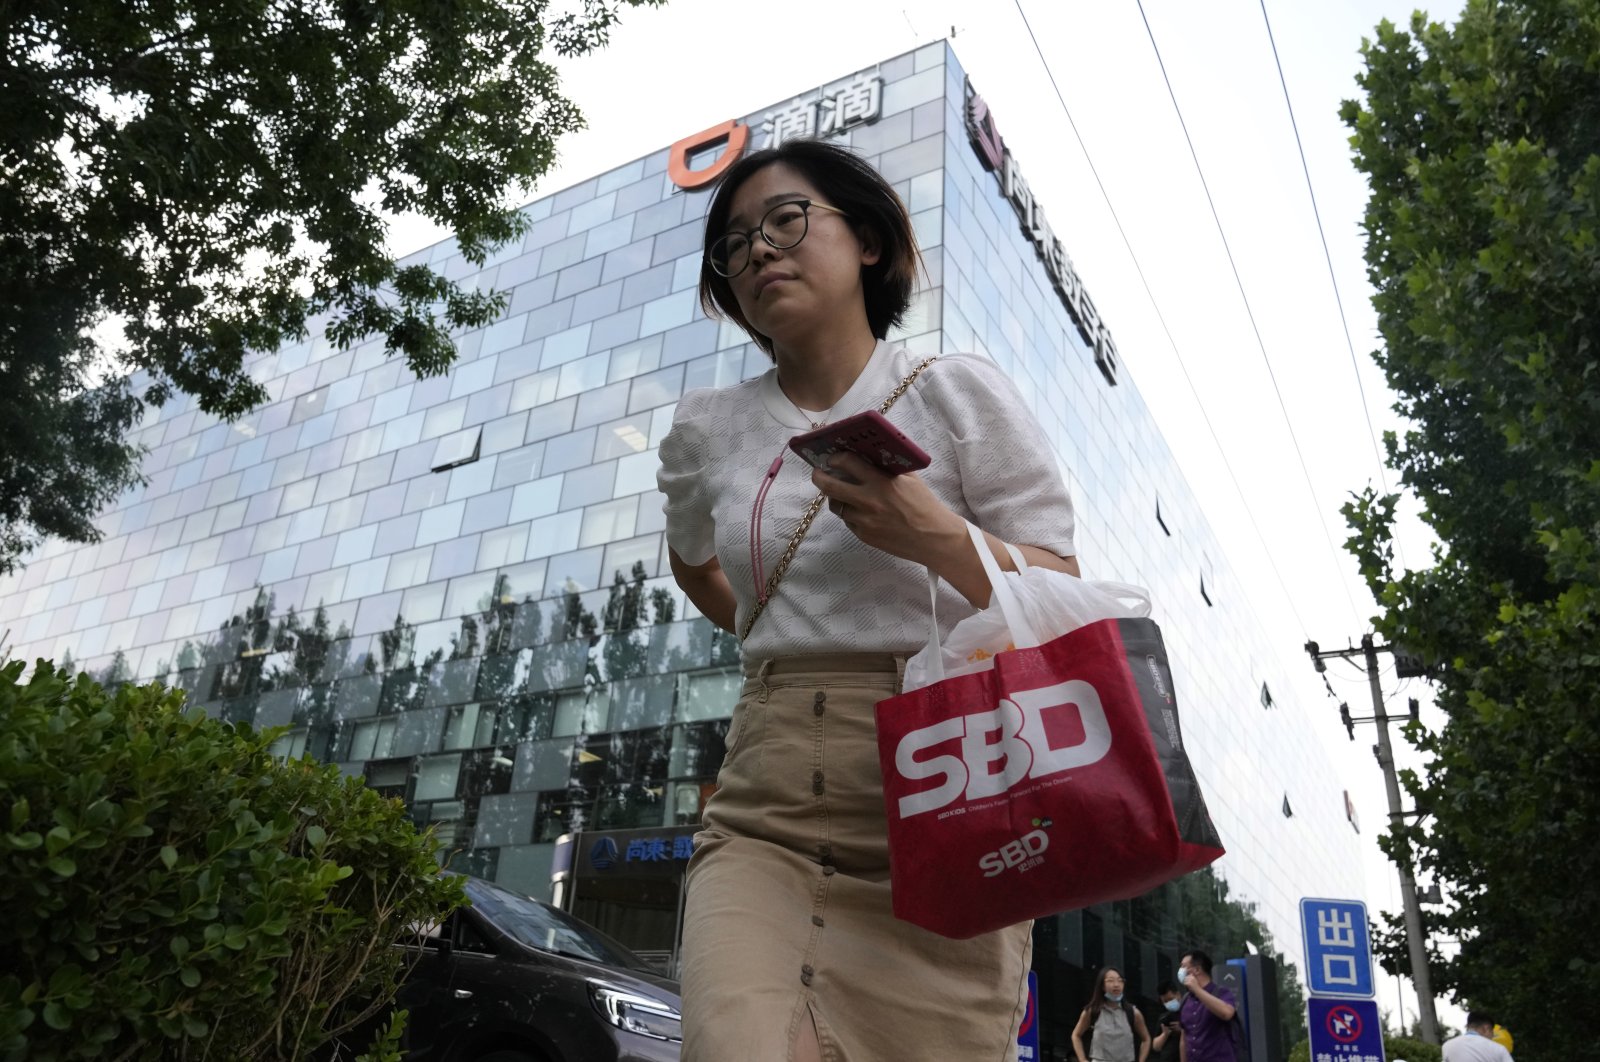 A woman passes by the Didi headquarters in Beijing, China, July 16, 2021. (AP Photo)